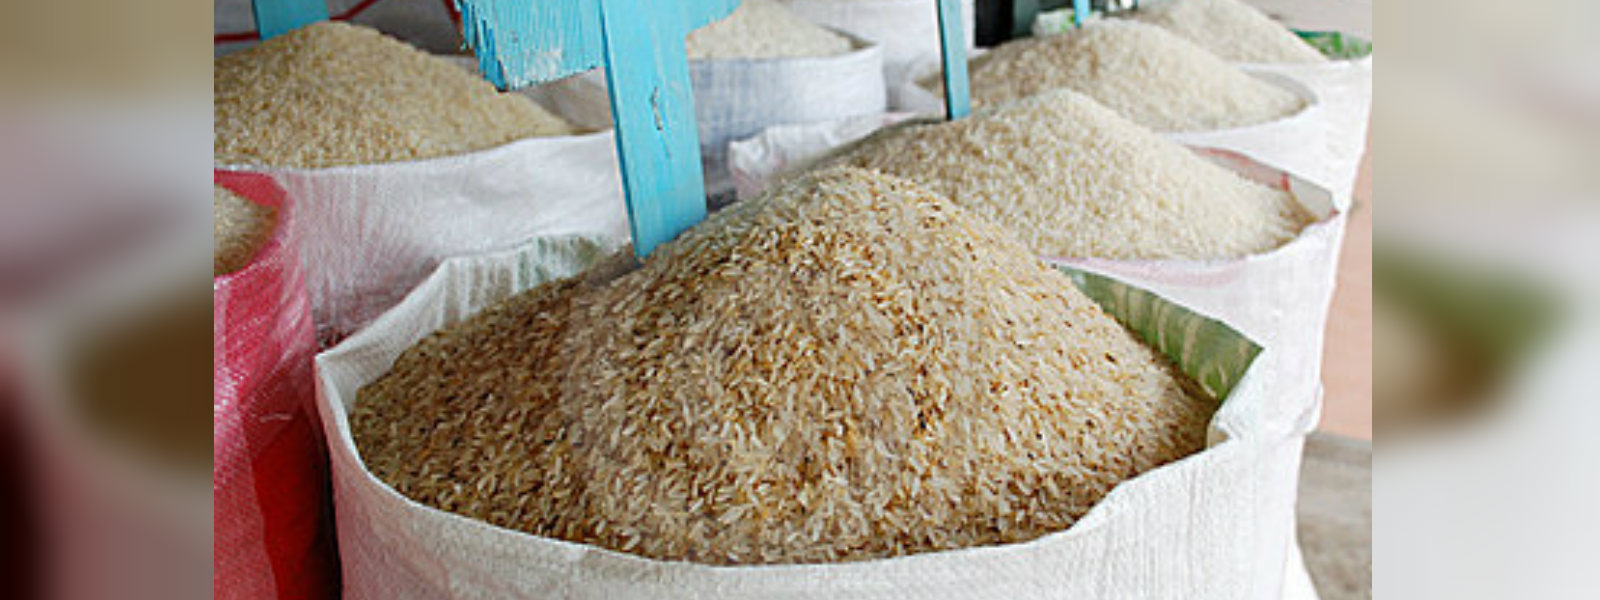 Maximum retail prices for several types of rice